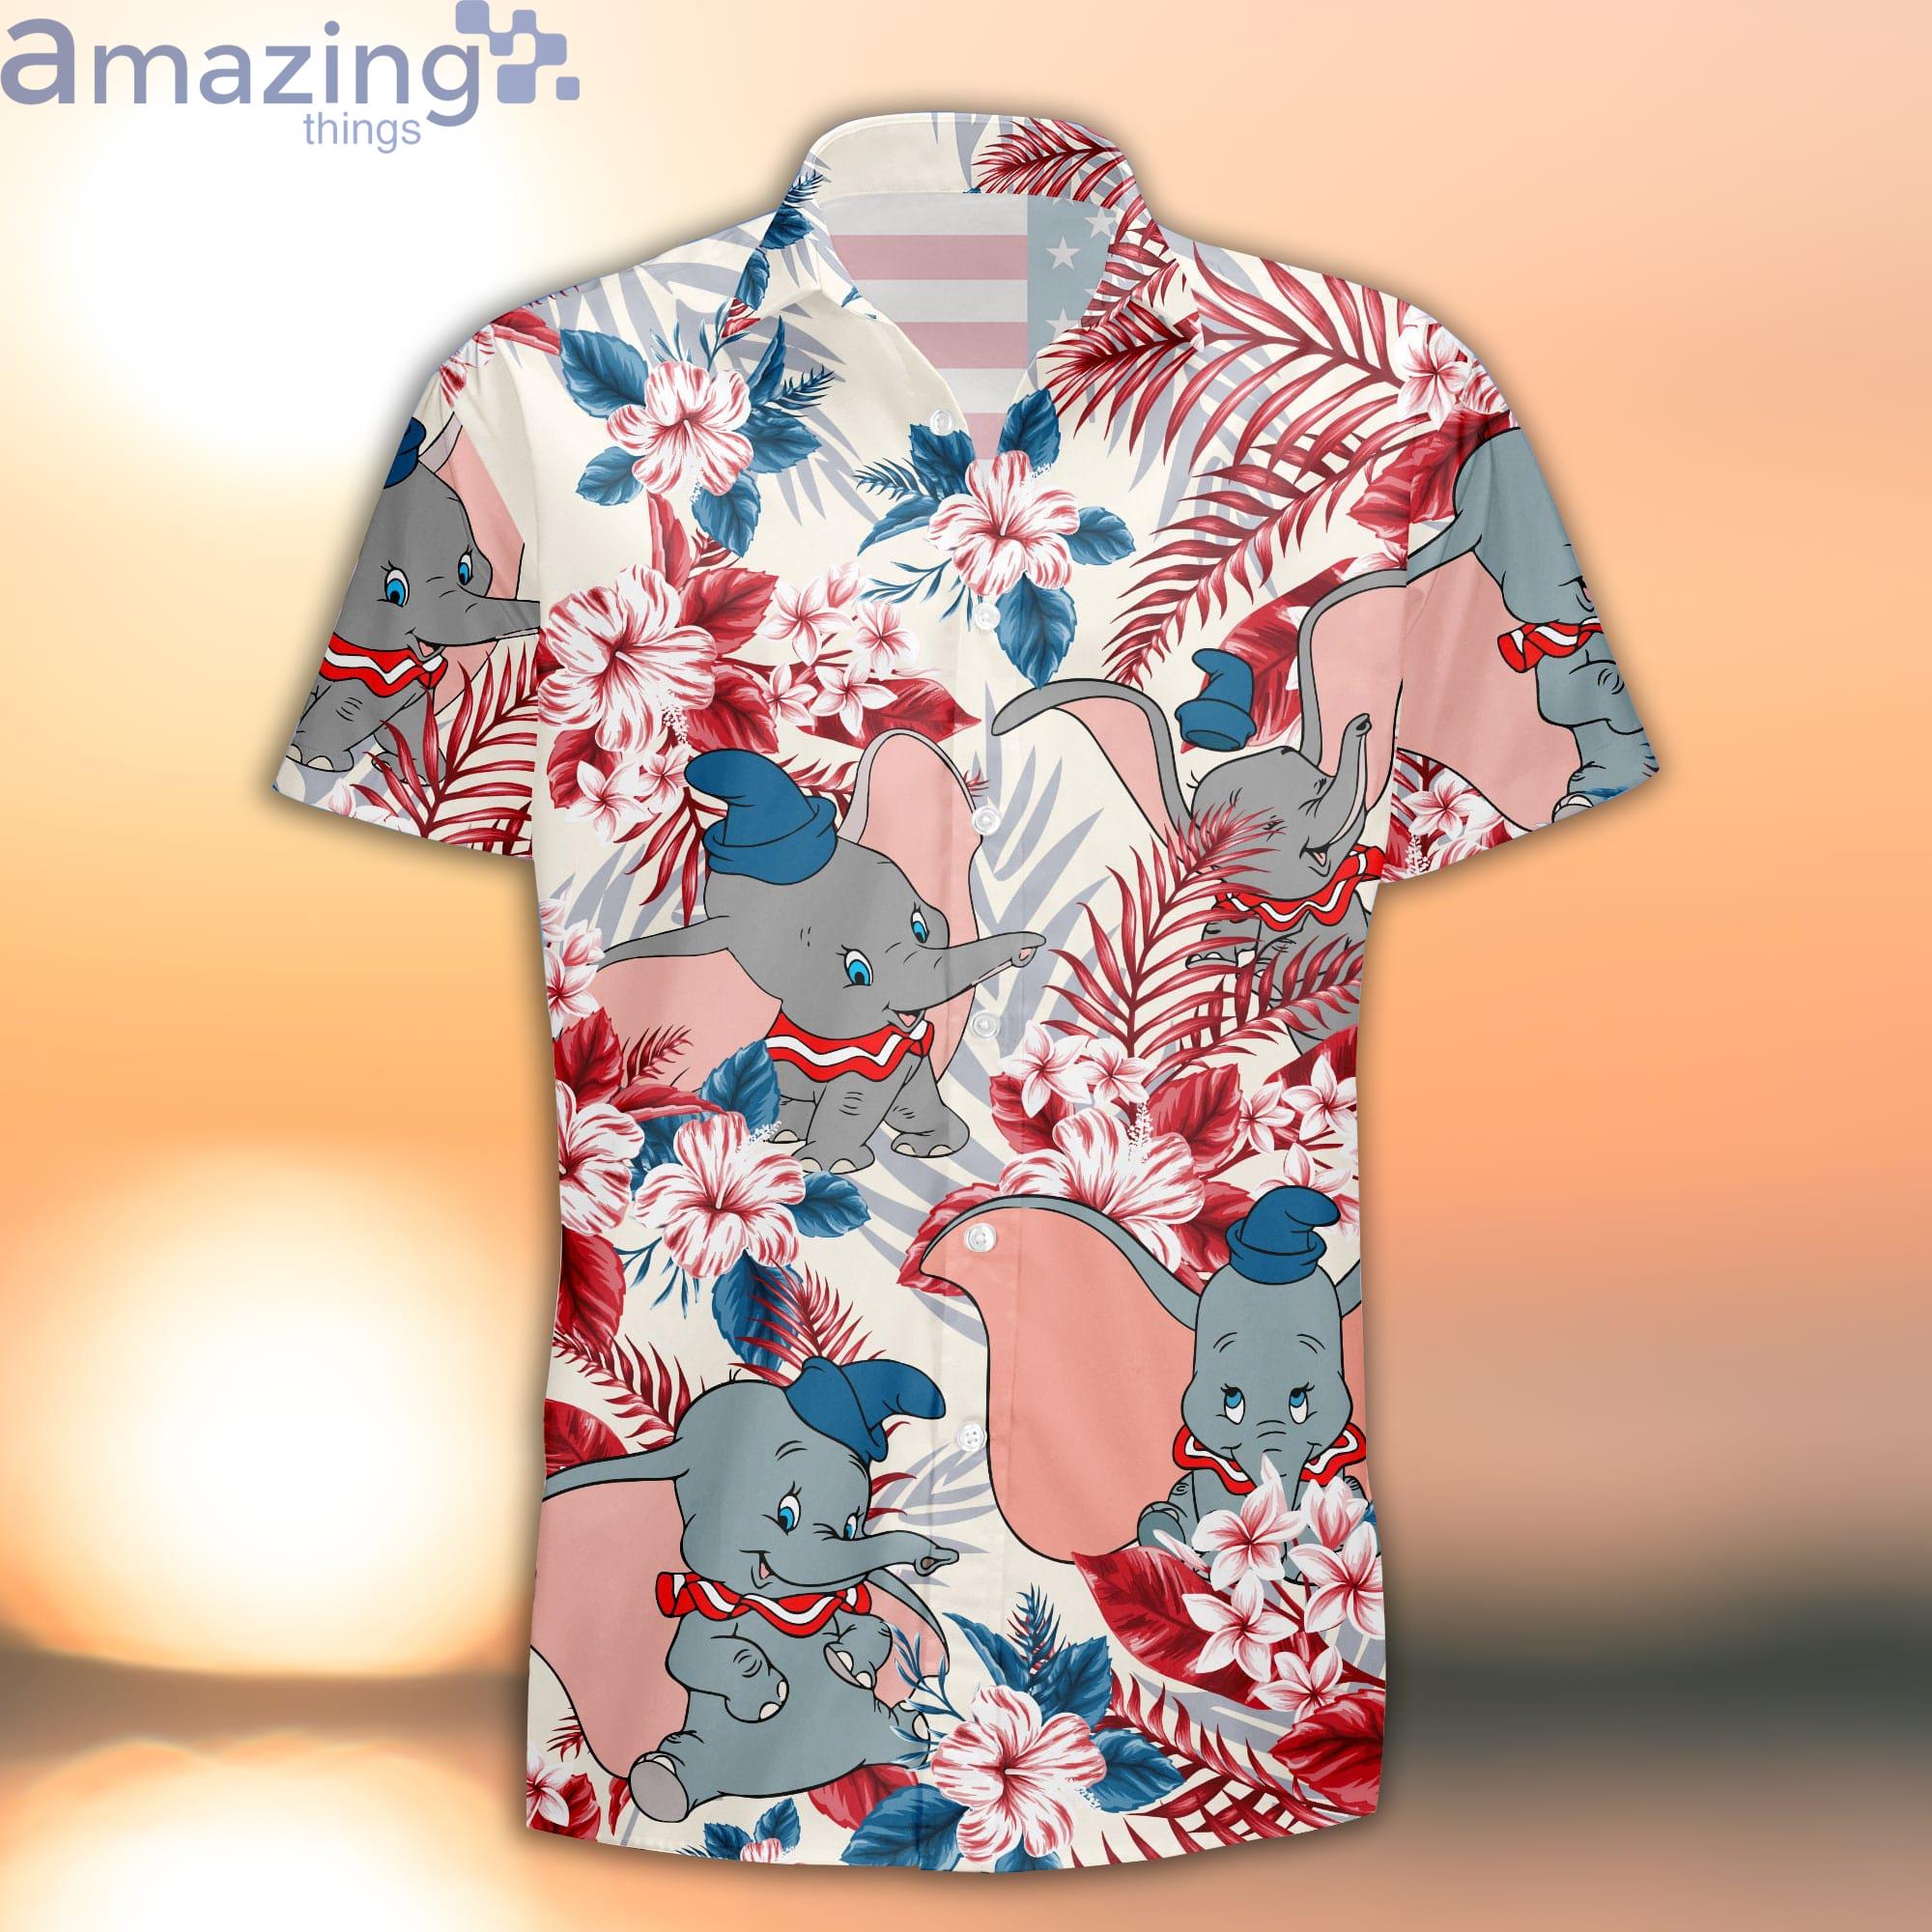 Dumbo Elephant Blue Red 4th July Independence Day Disney Hawaiian Shirt Product Photo 1